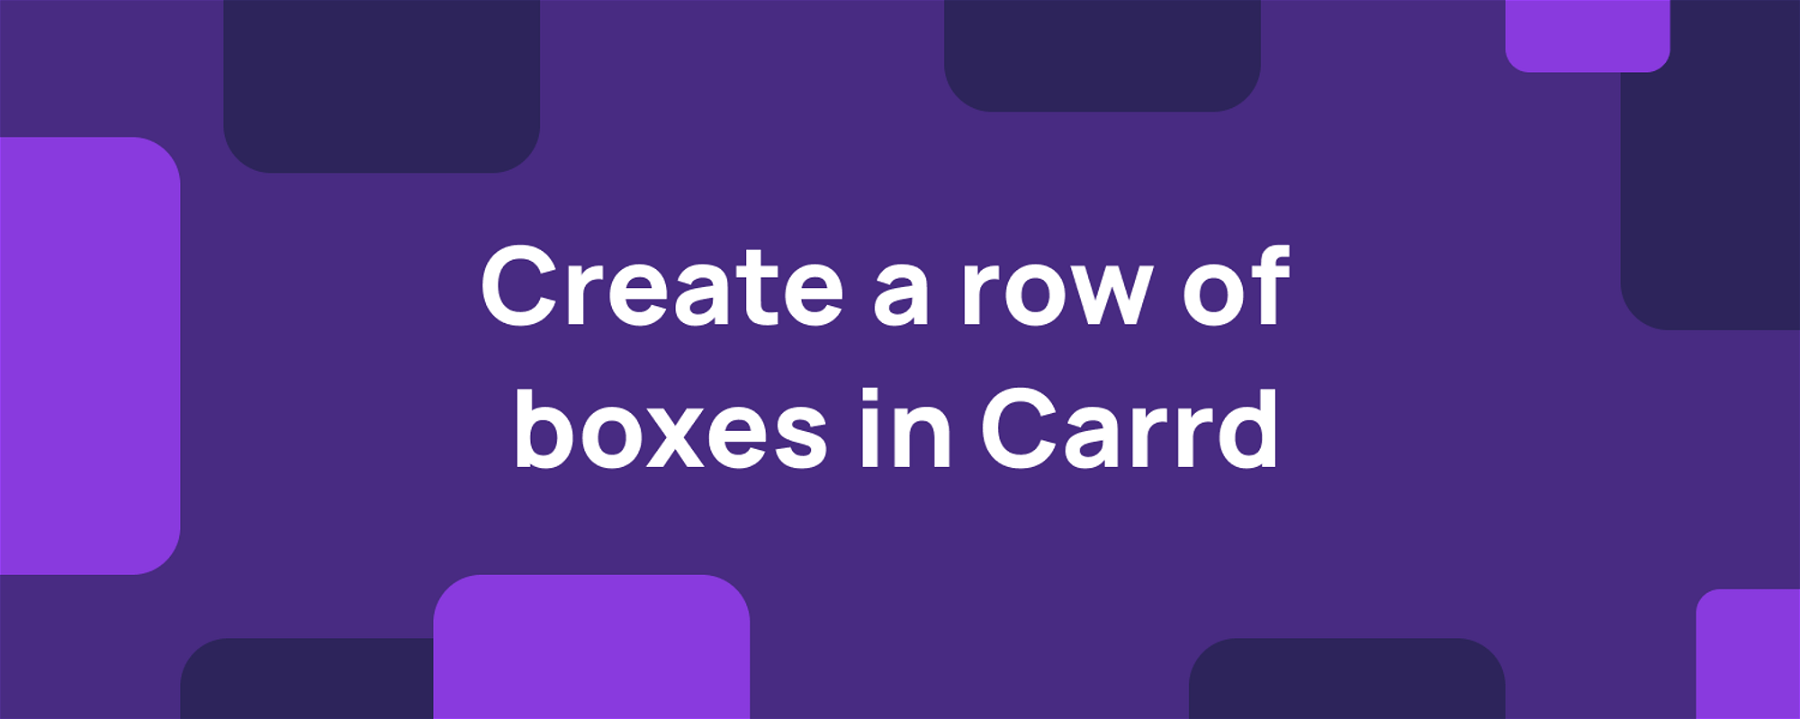 Create a row of boxes in Carrd